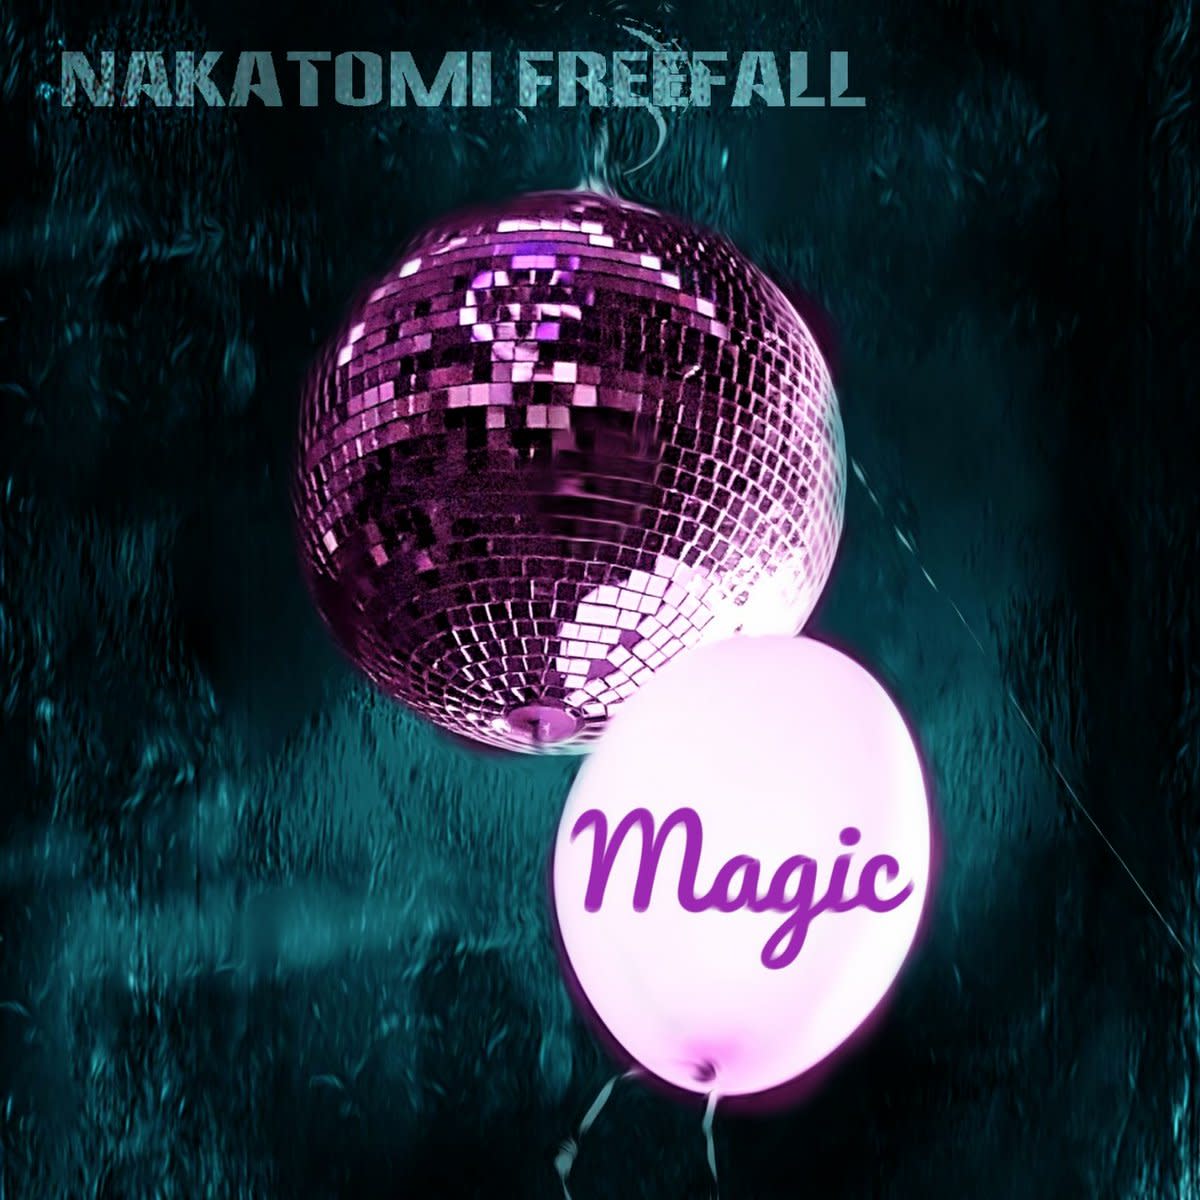 synth-single-review-magic-synthfam-remix-by-nakatomi-freefall-and-guests